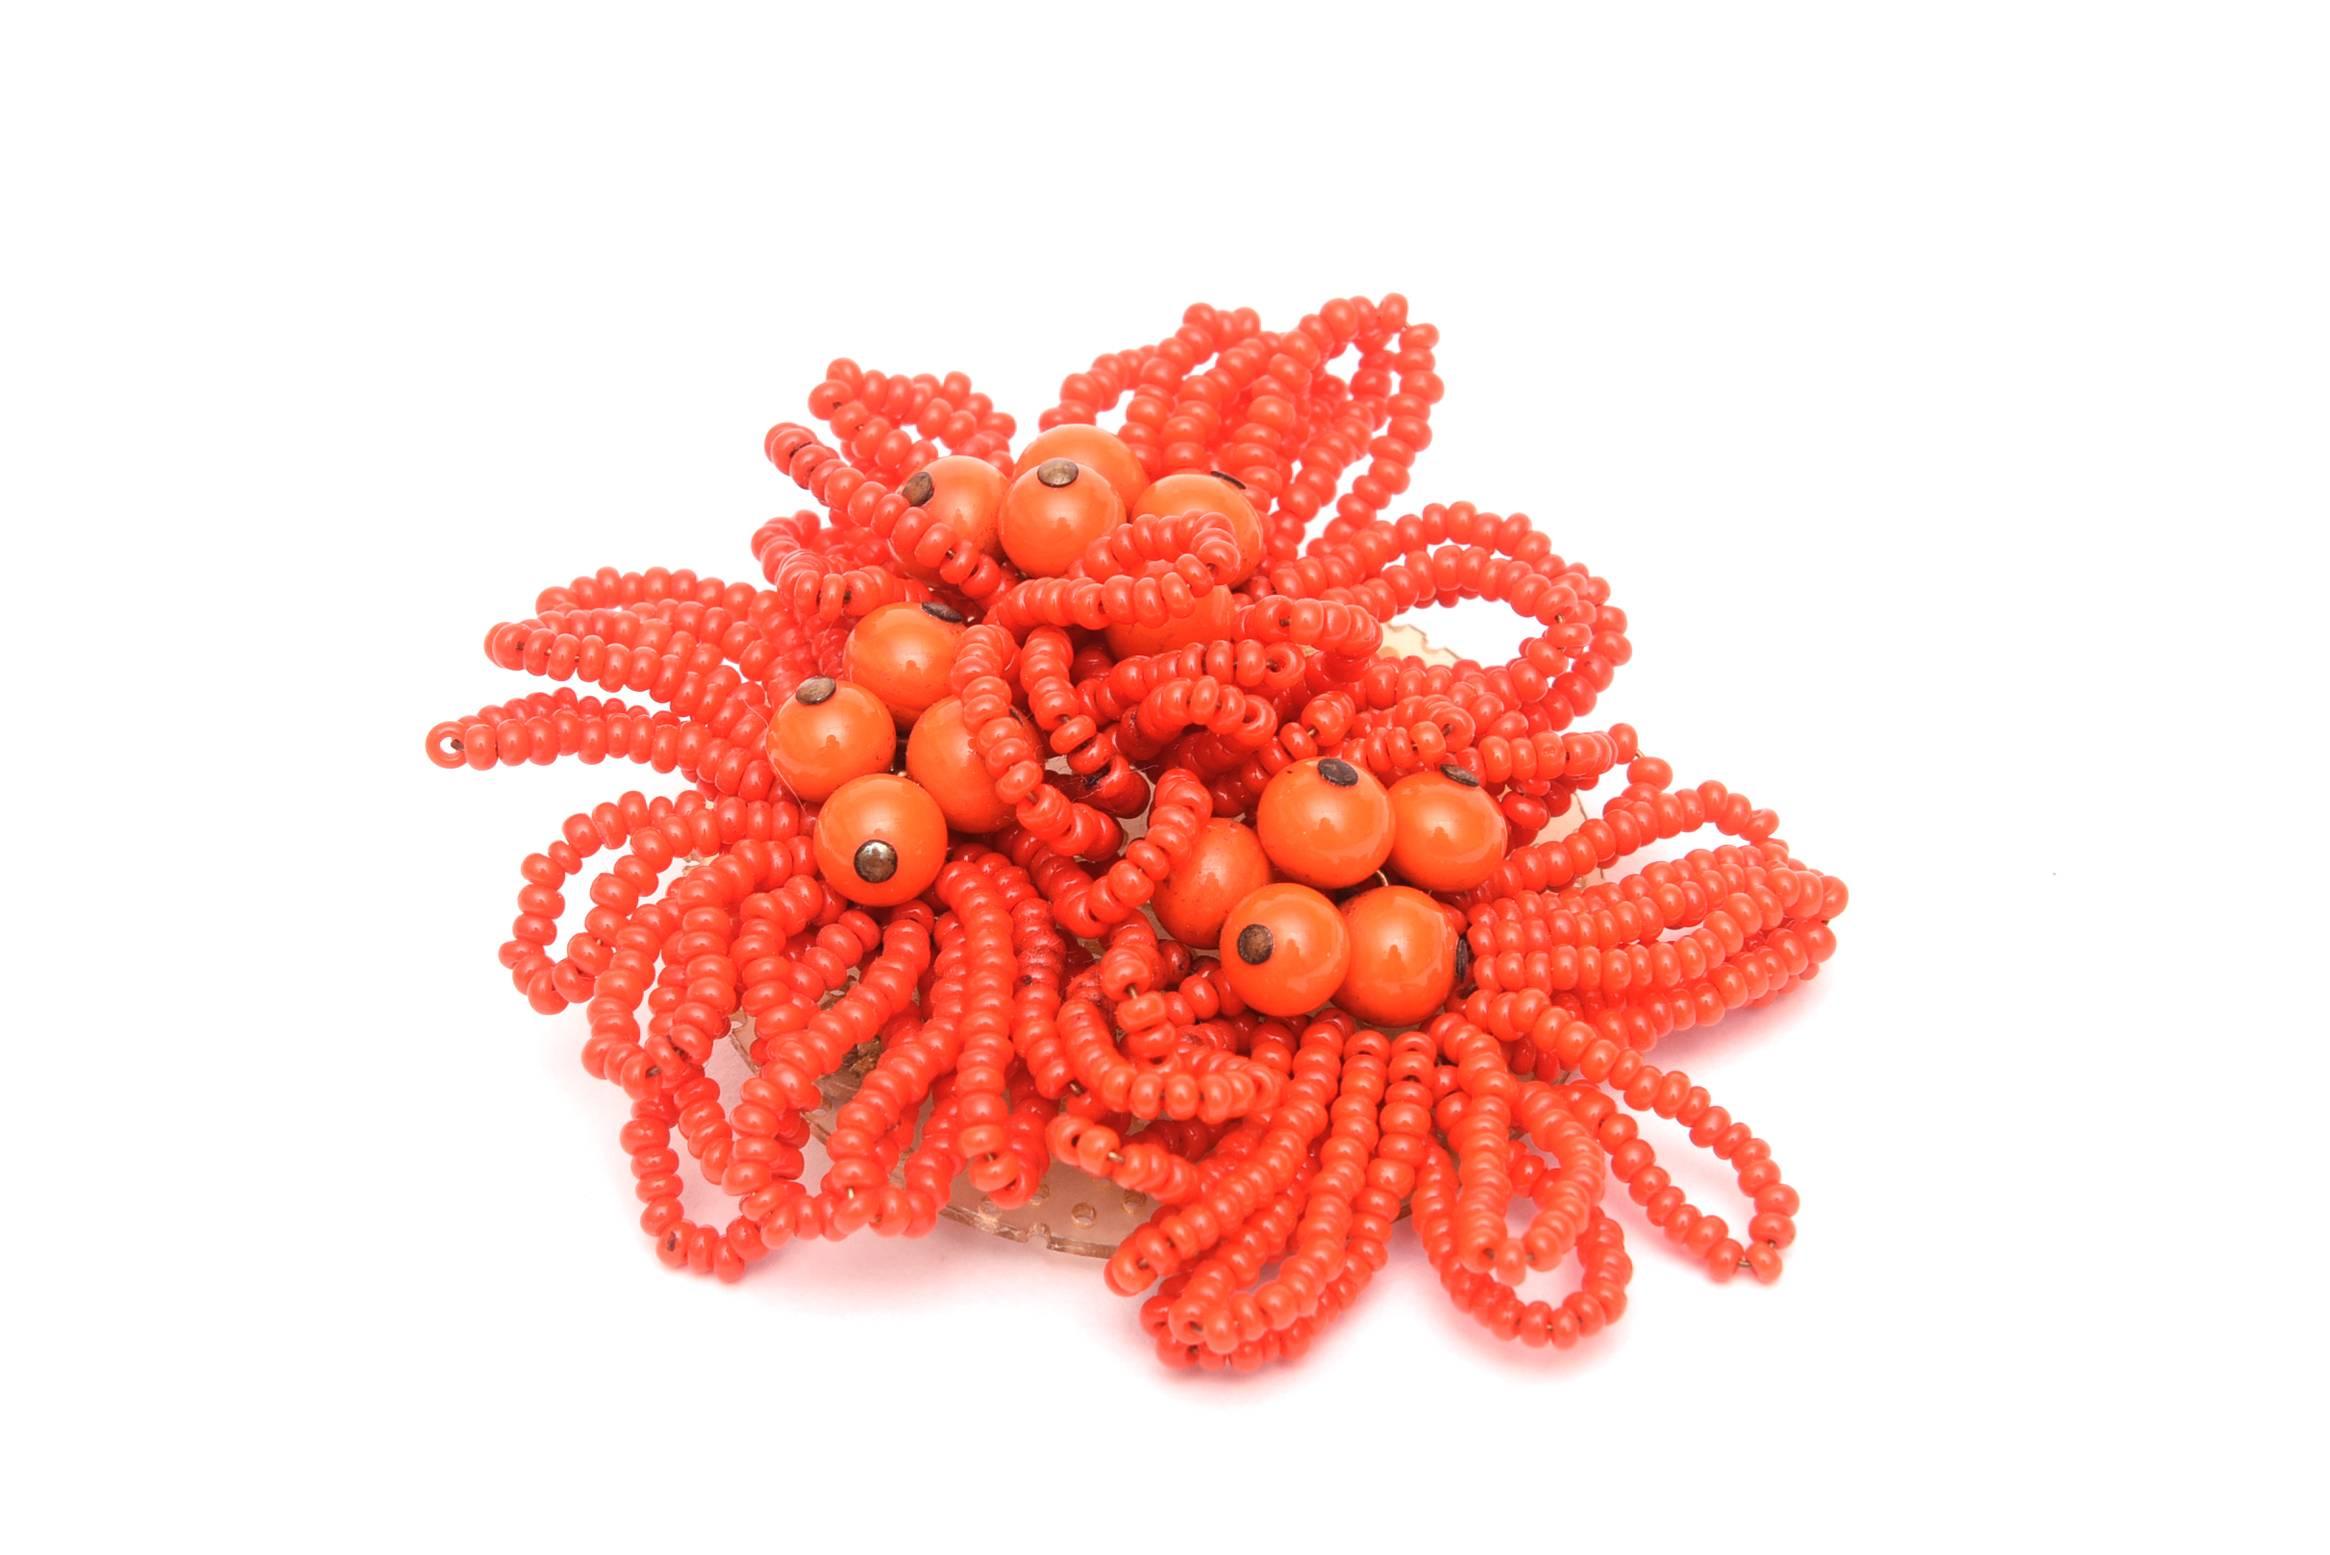 This unsigned vintage Miriam Haskell pin has the lovely color of orange beads in flower like sculptural form.There are larger beads with silver tips amongst the cluster. This is not a common piece by Haskell. It is 3.25